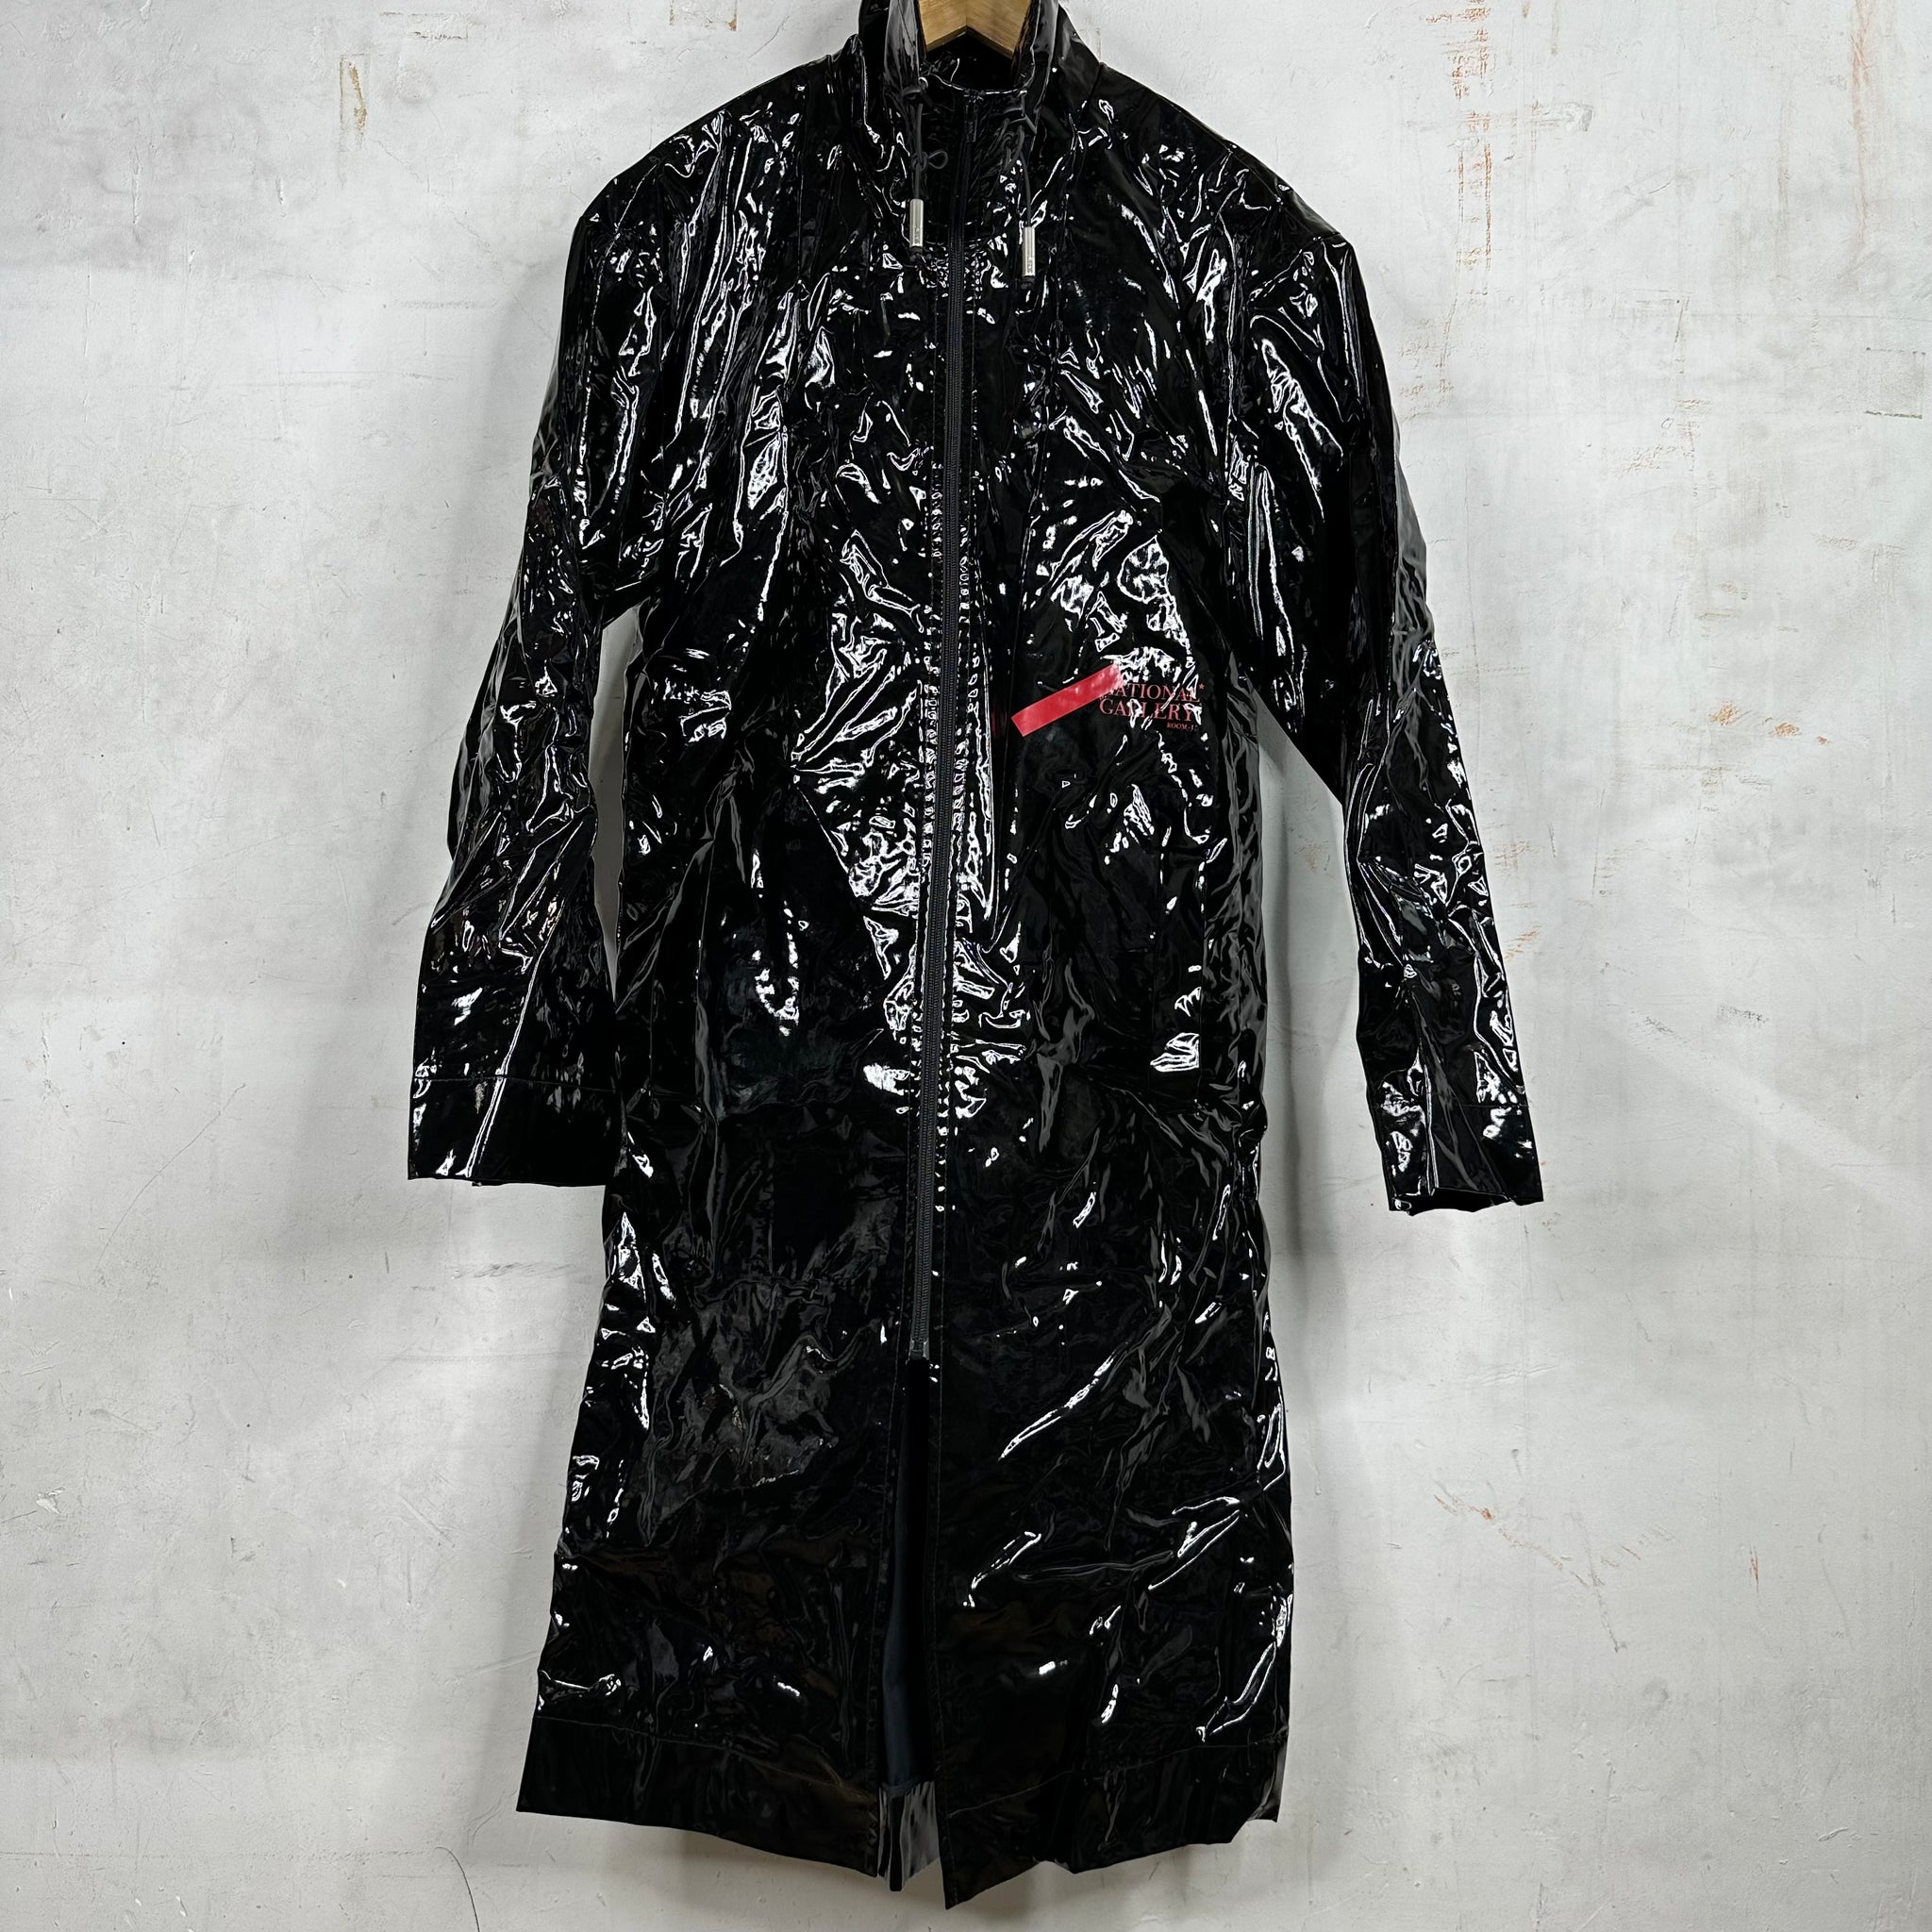 A-Cold-Wall National Gallery Trench Coat